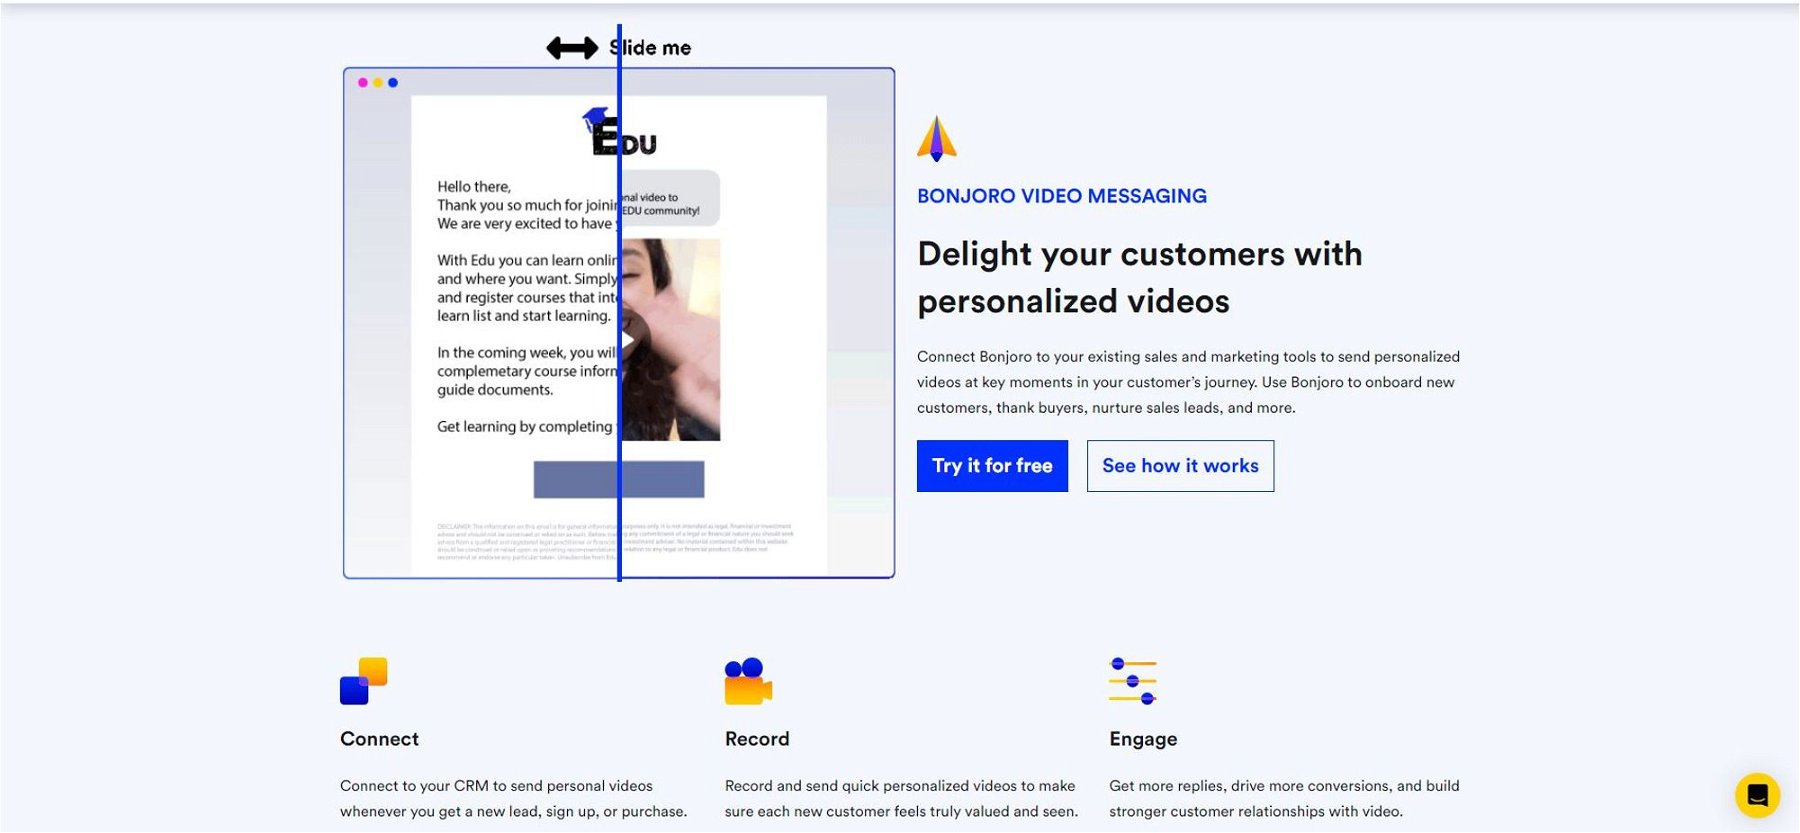 Bonjoro lets you record personalized videos to engage and connect better with your customers.